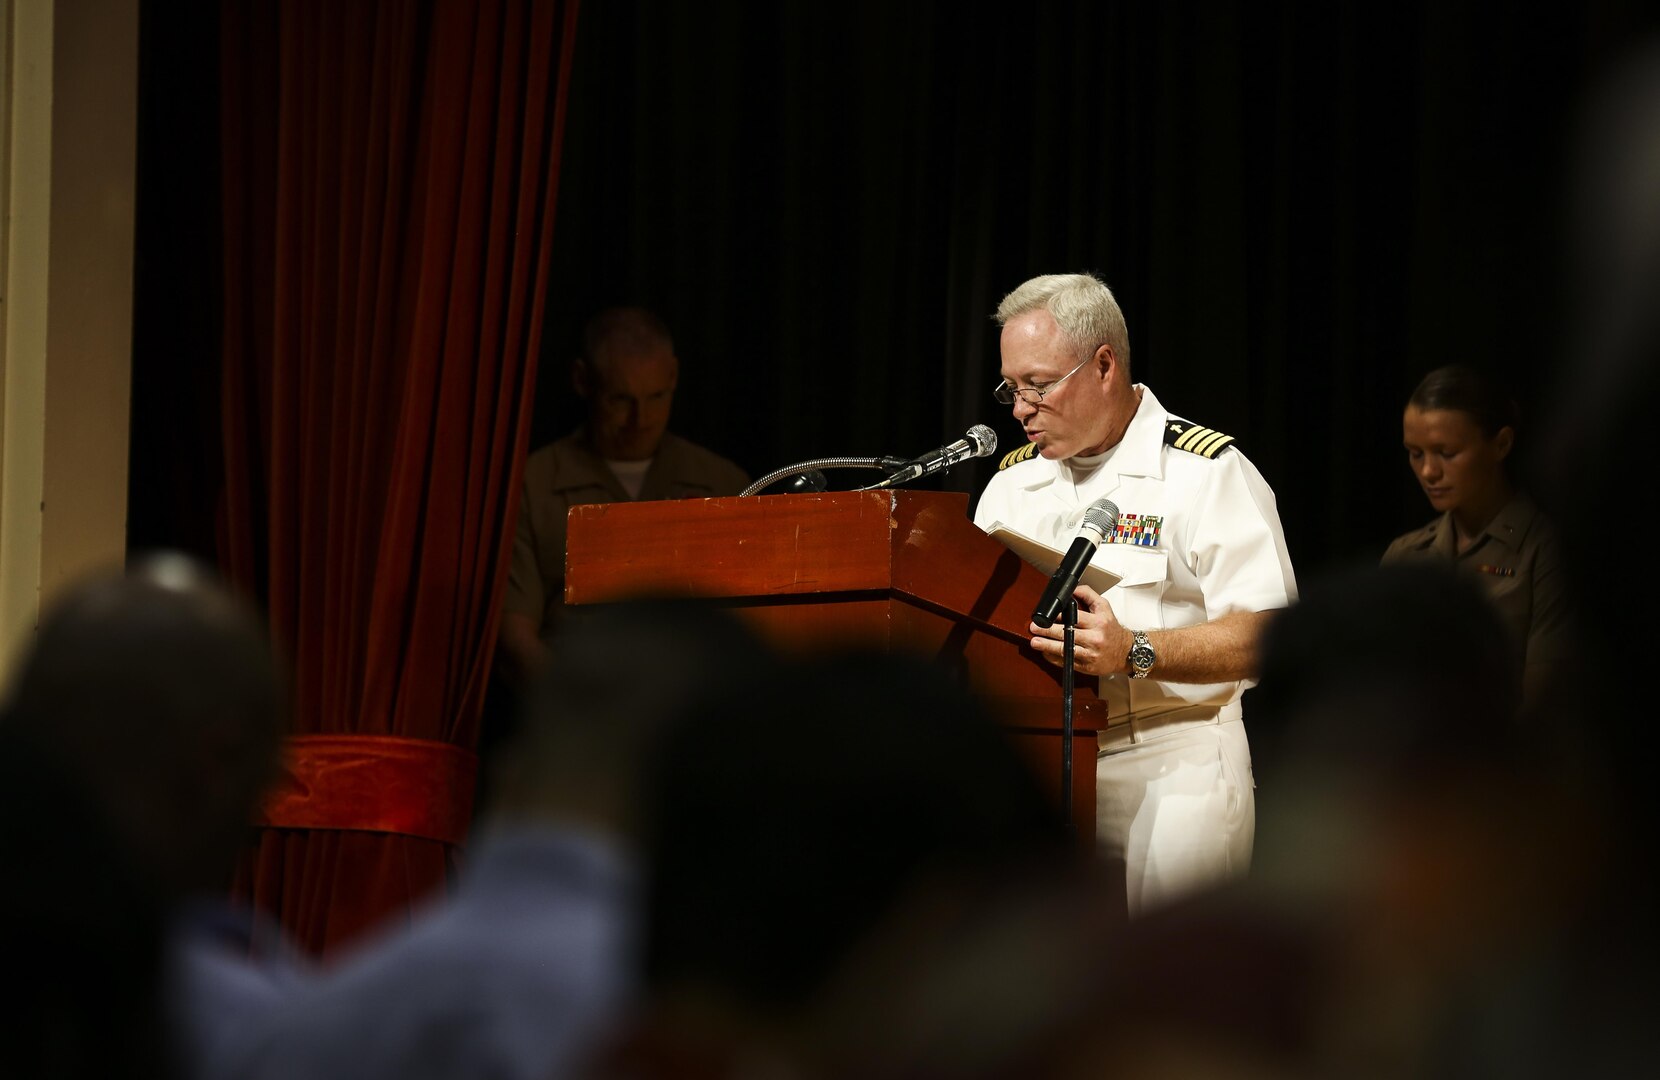 U.S. Navy Capt. Mark Hendricks, force chaplain, U.S. Marine Corps Forces, Pacific, gives the invocation during the First Responder Recognition Ceremony at the Neal S. Blaisdell Center, in Honolulu, Dec. 18, 2015. The first responders aided in the rescue and treatment of the crew and passengers of a 15th Marine Expeditionary Unit MV-22 Osprey tilt-rotor aircraft, which suffered a mishap at Marine Corps Training Area Bellows on May 2015.